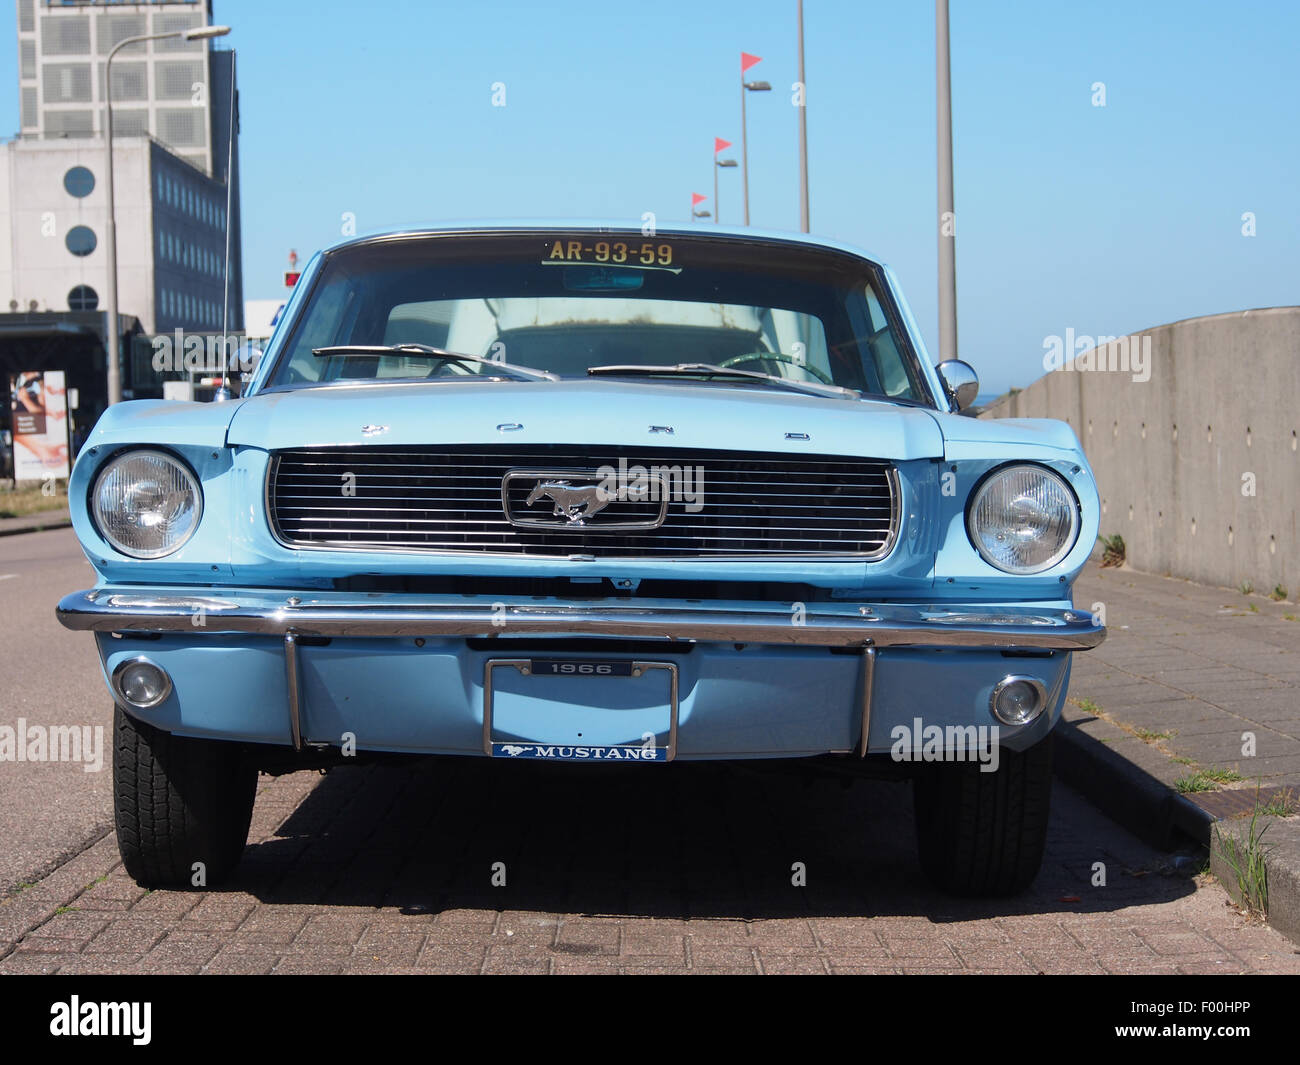 1966 Ford Mustang light blue, pic1 Stock Photo